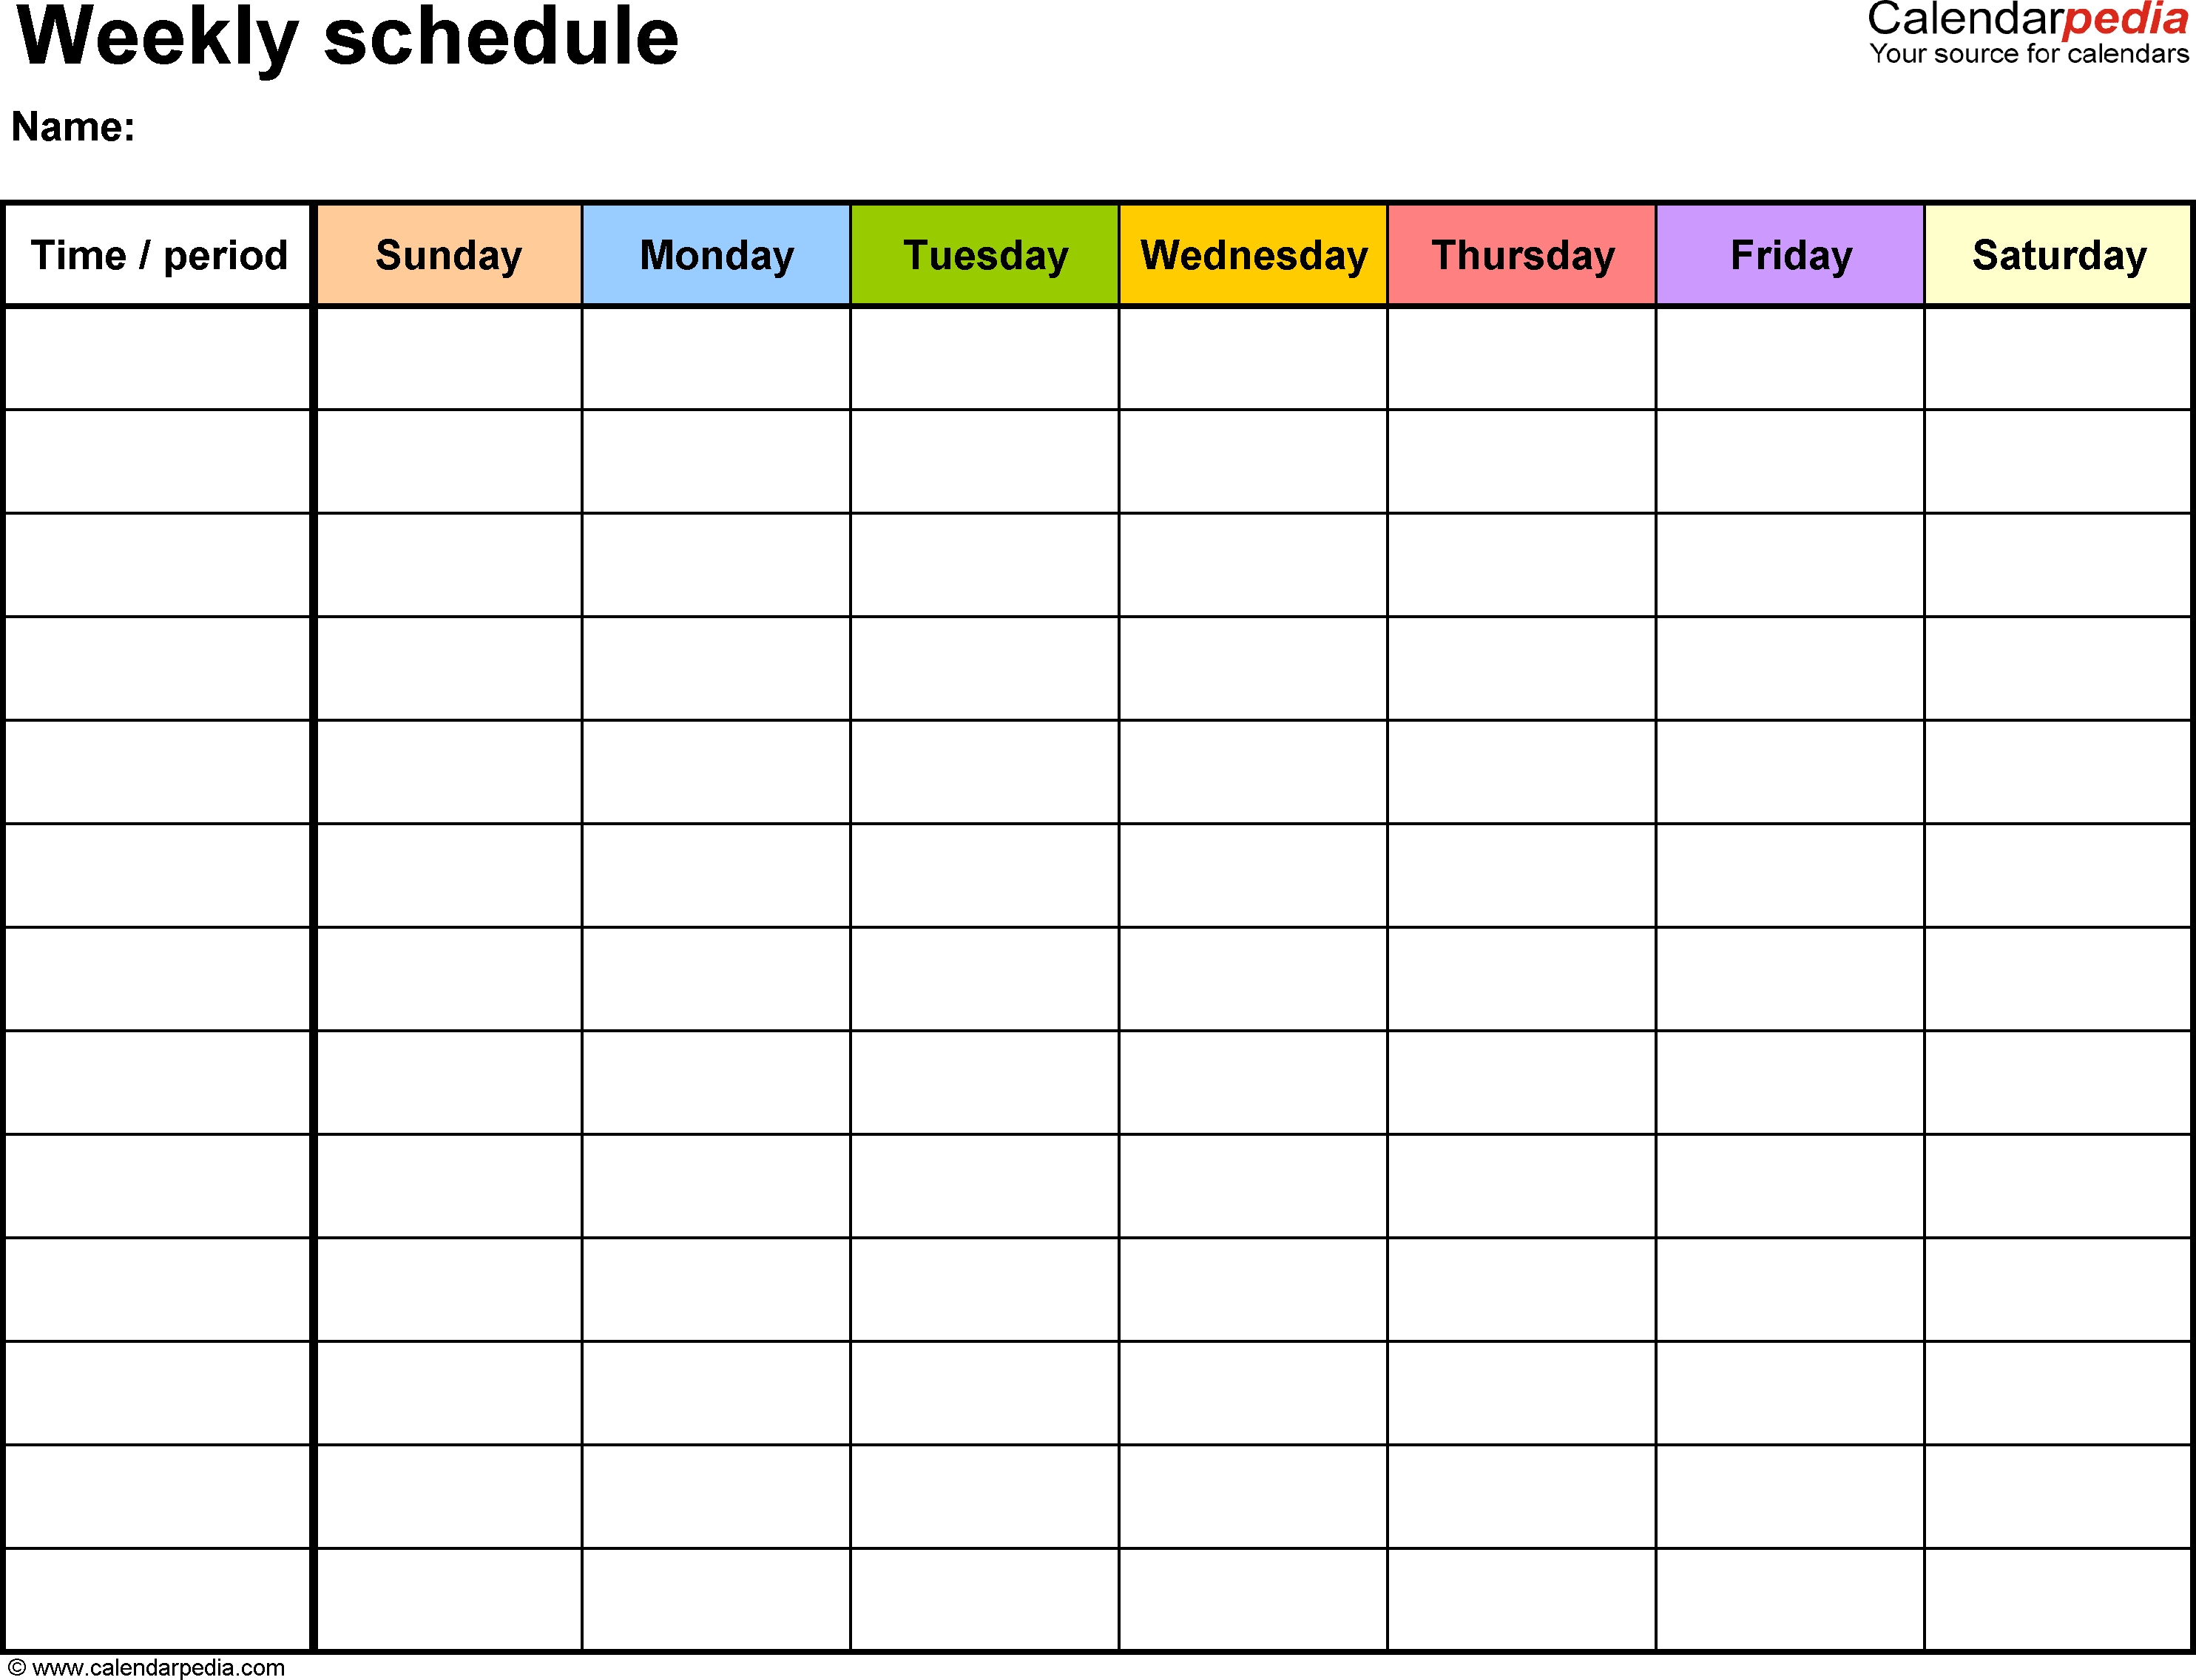 Free Weekly Schedule Templates For Excel - 18 Templates-7 Weeks Calendar Template